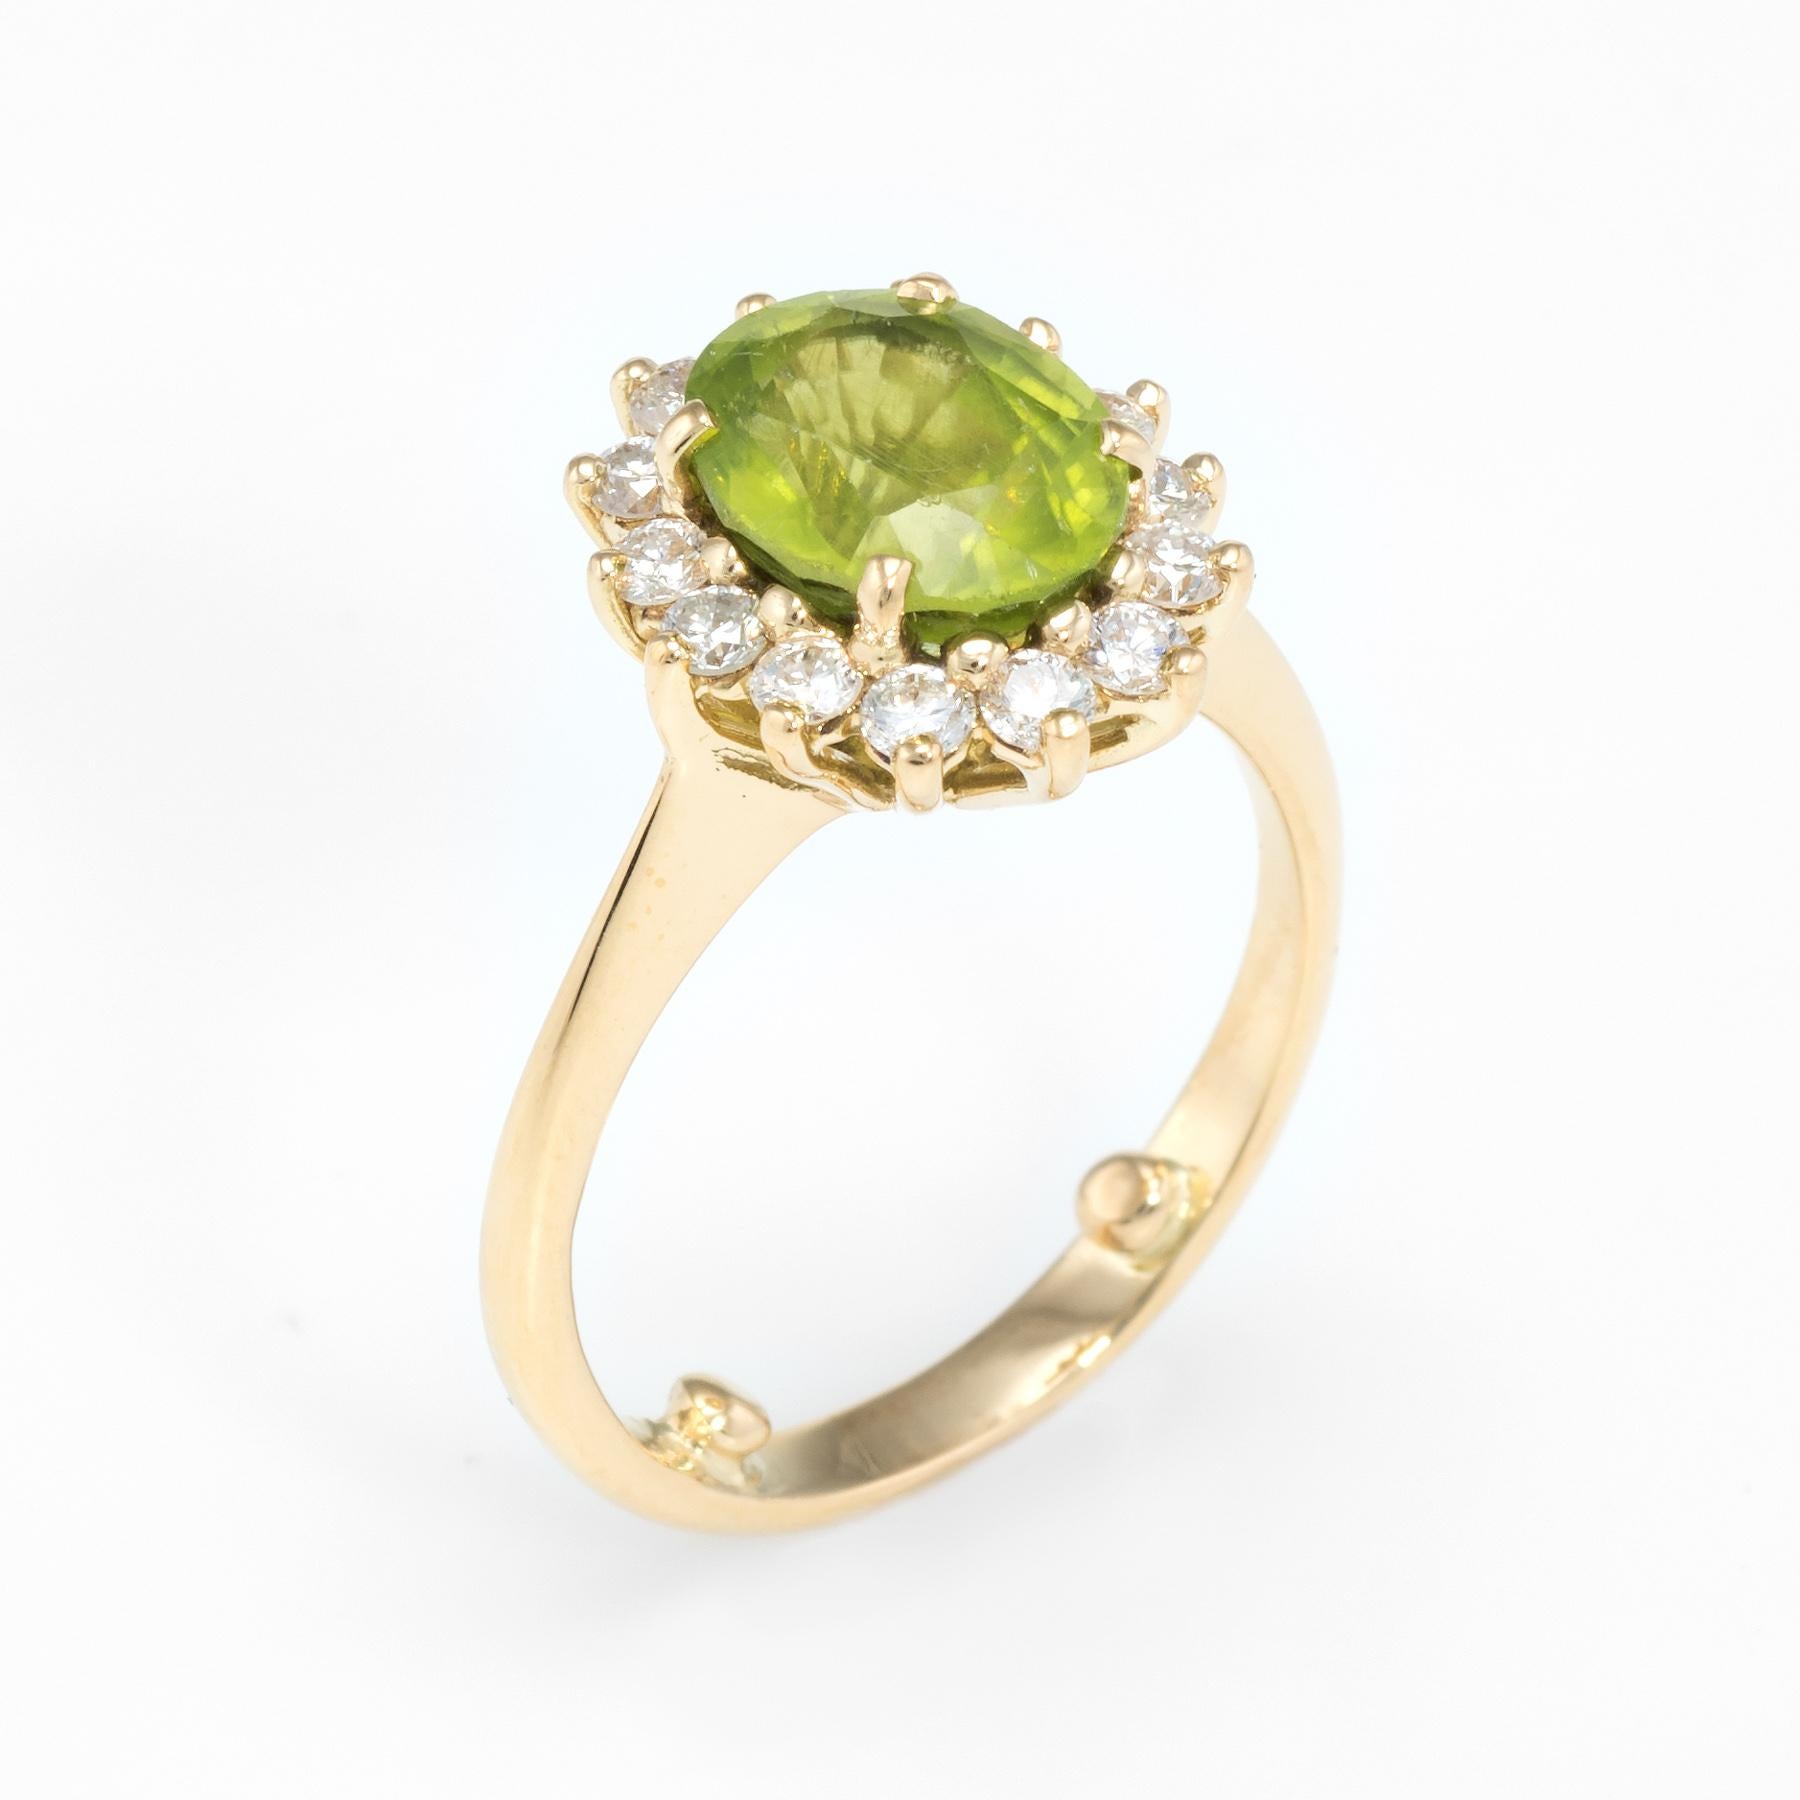 Elegant vintage cocktail ring, crafted in 18 karat yellow gold. 

Faceted oval cut peridot measures 9mm x 7mm (estimated at 2 carats), accented with an estimated 0.50 carats of diamonds (estimated at H color and VS2 clarity). The peridot is in